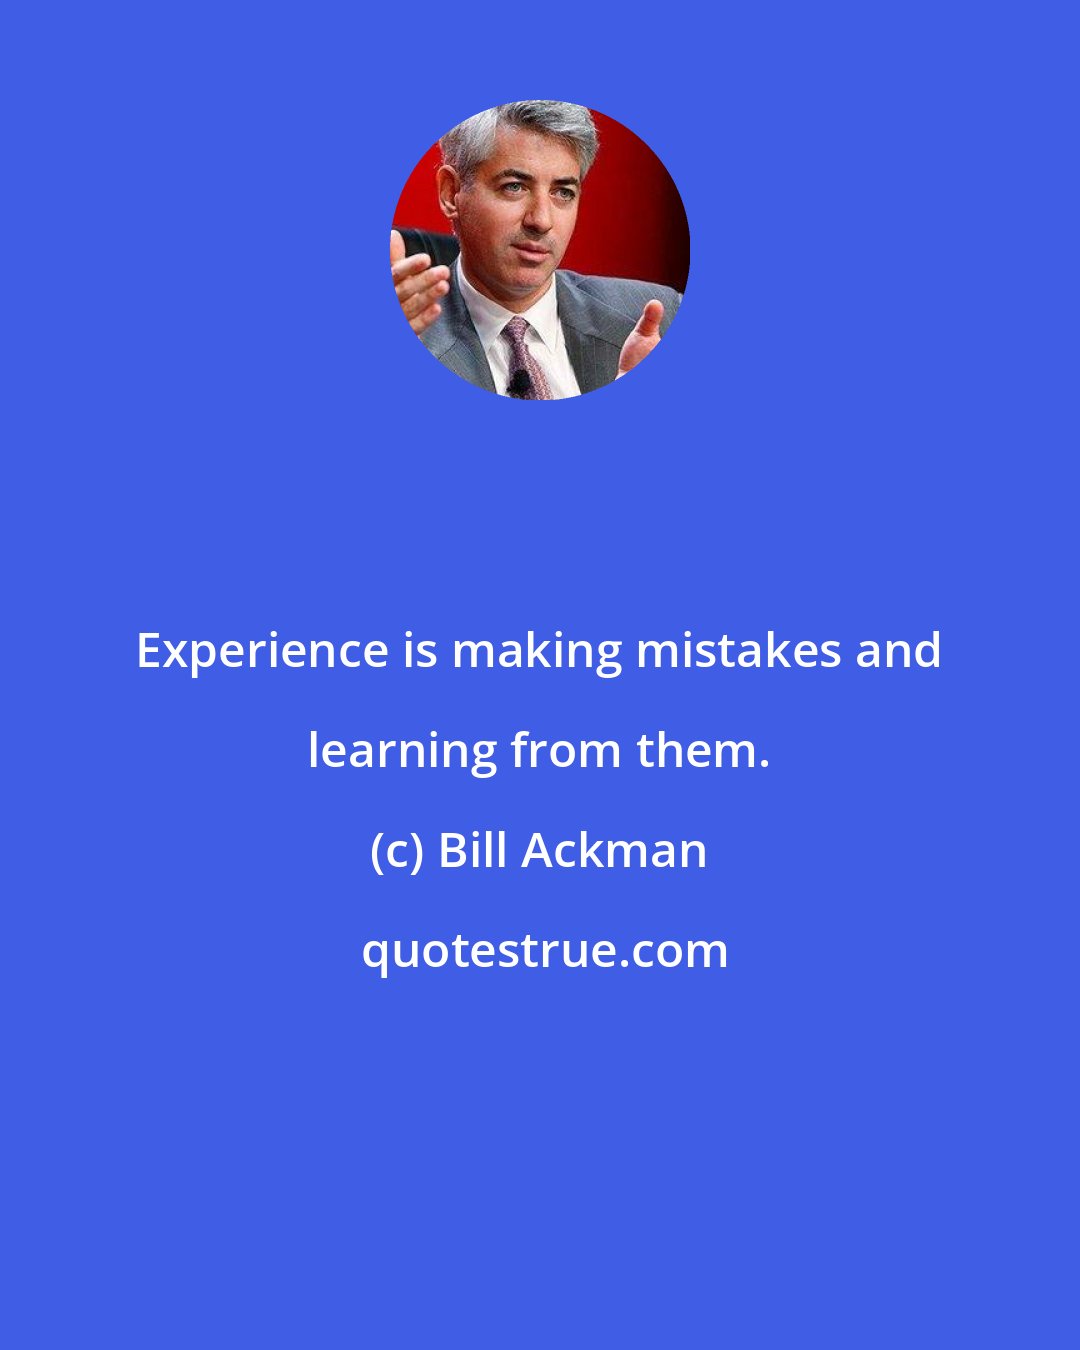 Bill Ackman: Experience is making mistakes and learning from them.